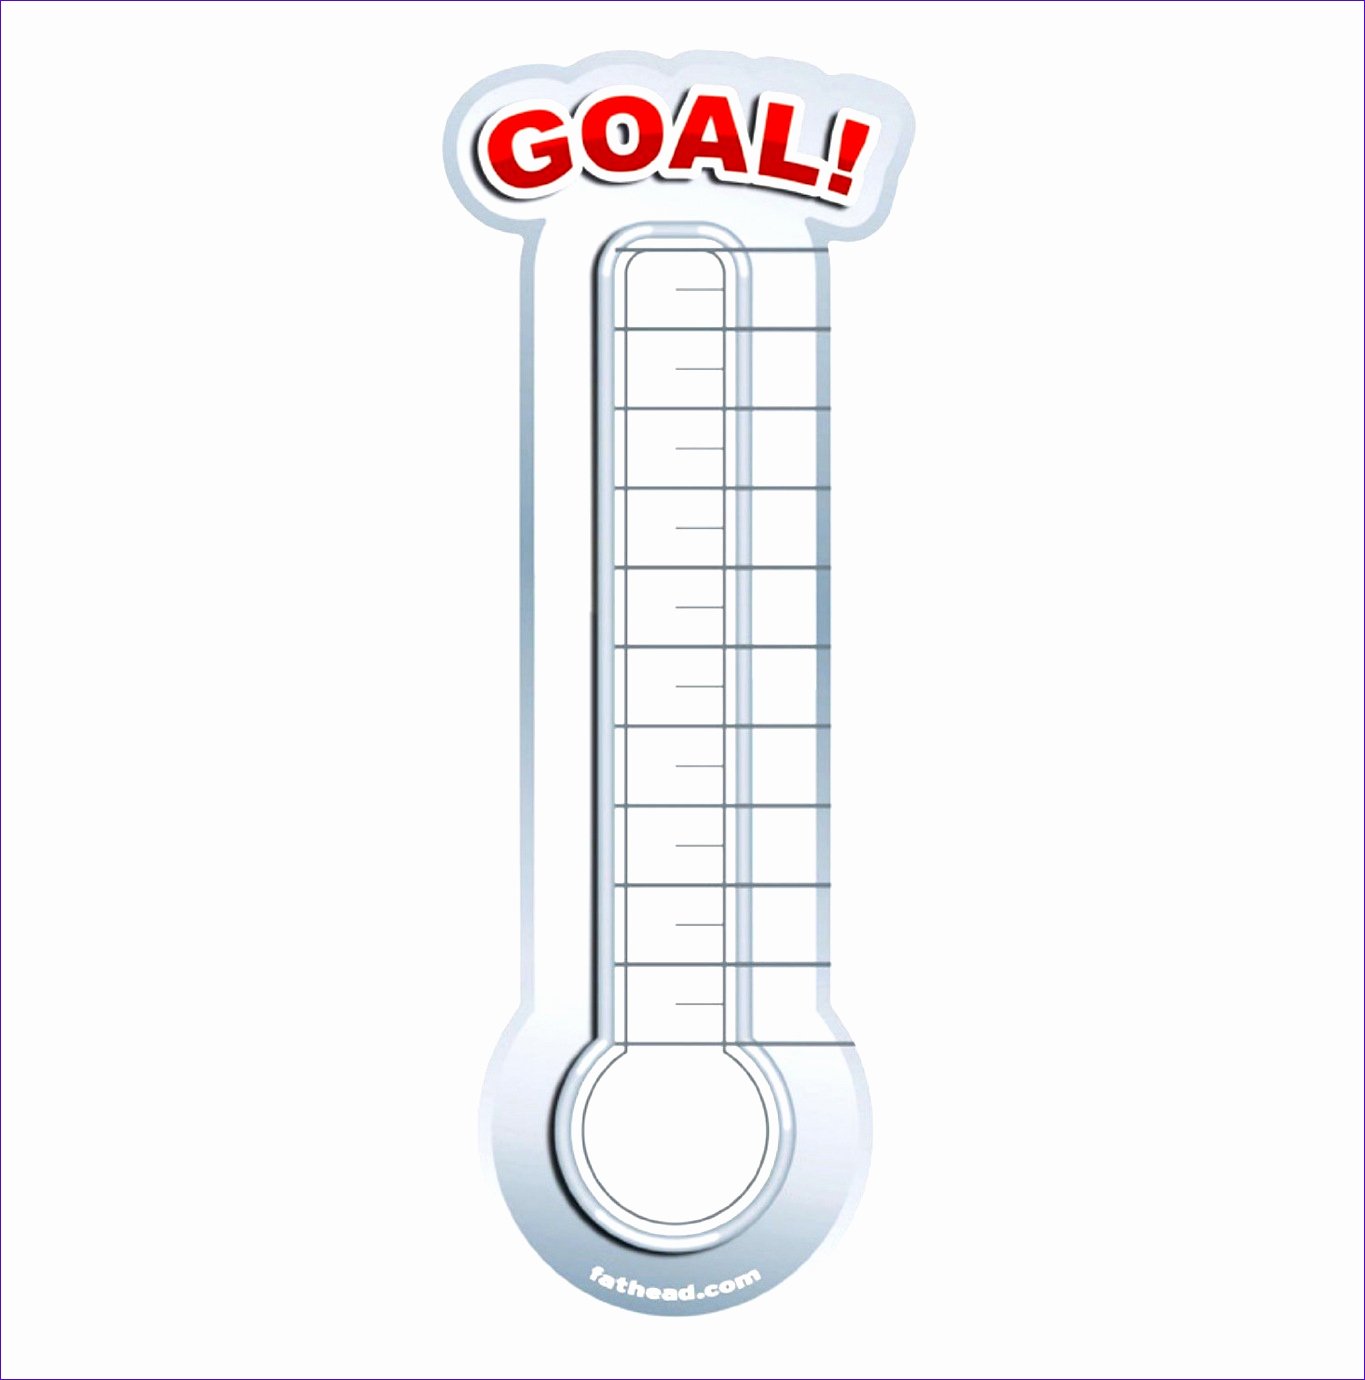 Fundraising thermometer Template Excel Awesome 9 Fundraising thermometer Template Excel Exceltemplates